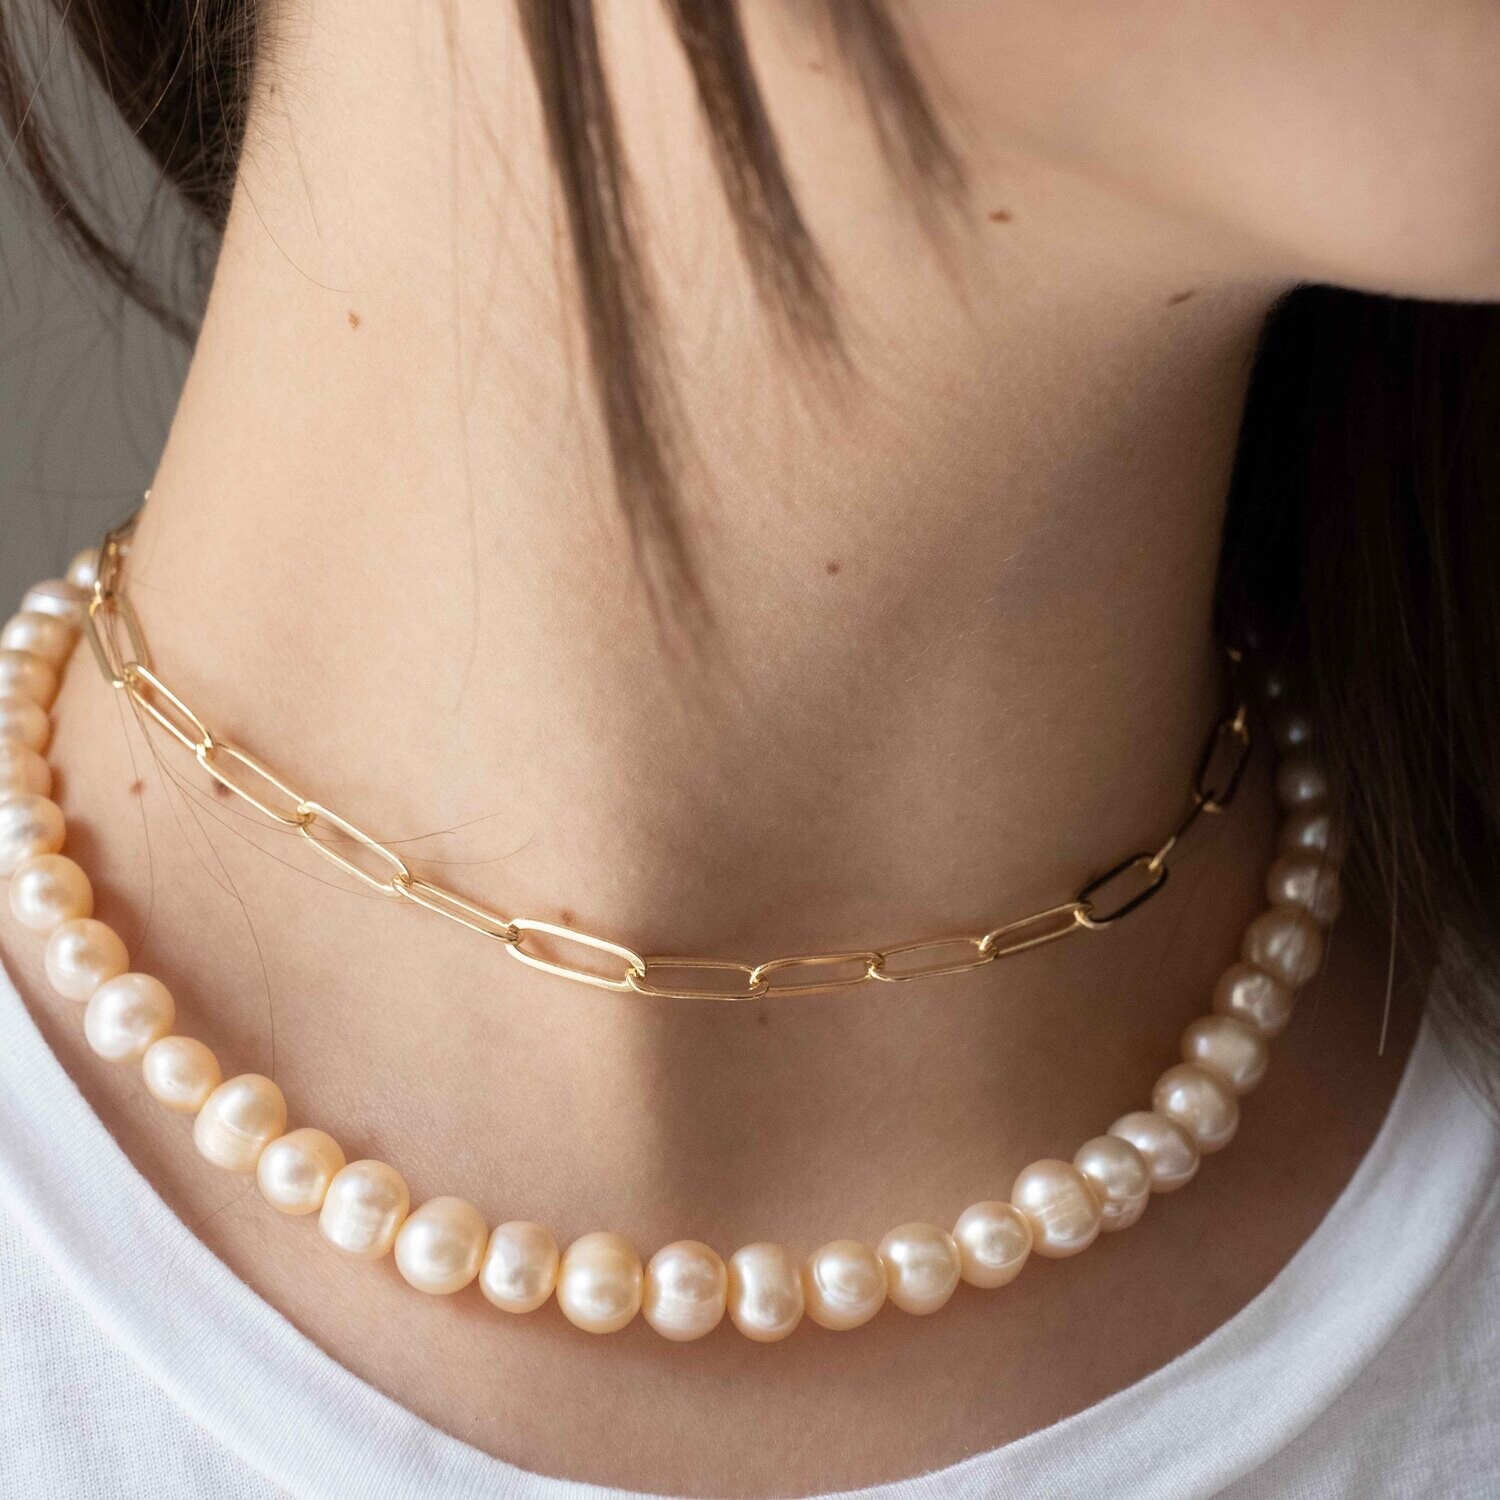 Natural pearl necklace "Anett"